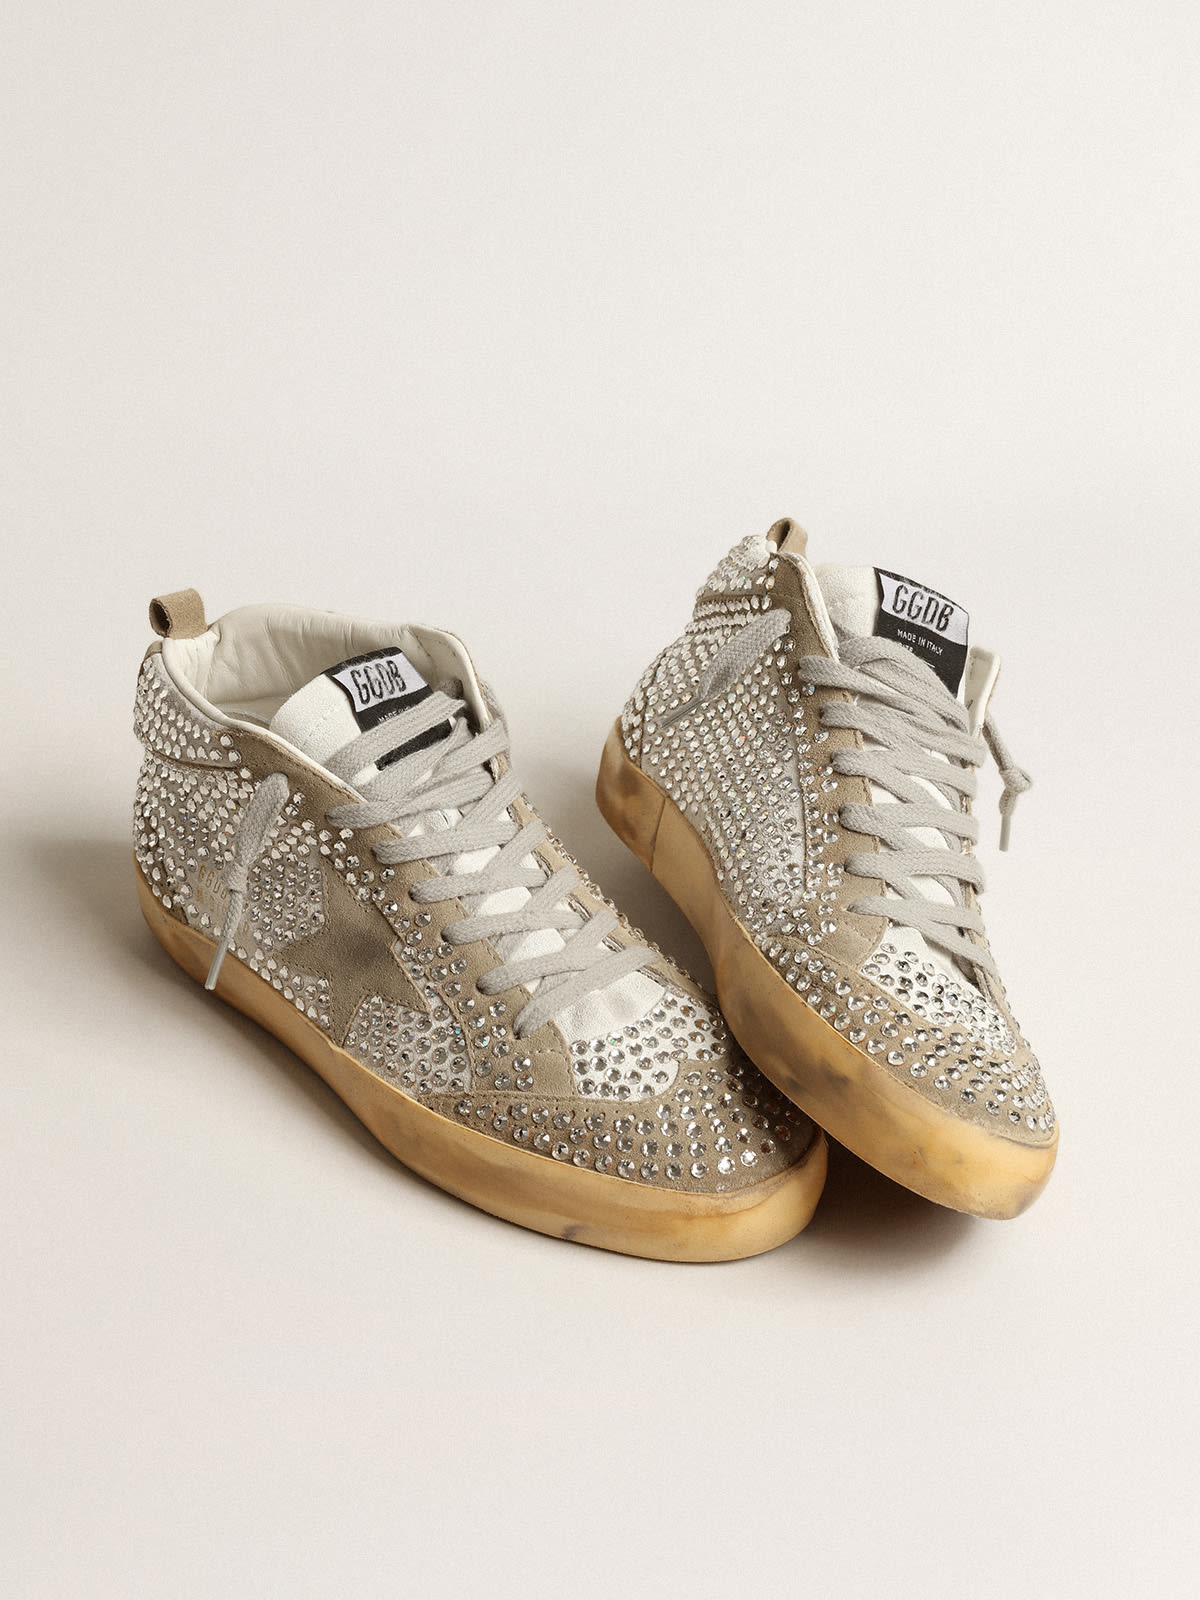 Golden Goose - Mid Star in white and dove-gray suede with Swarovski crystals in 